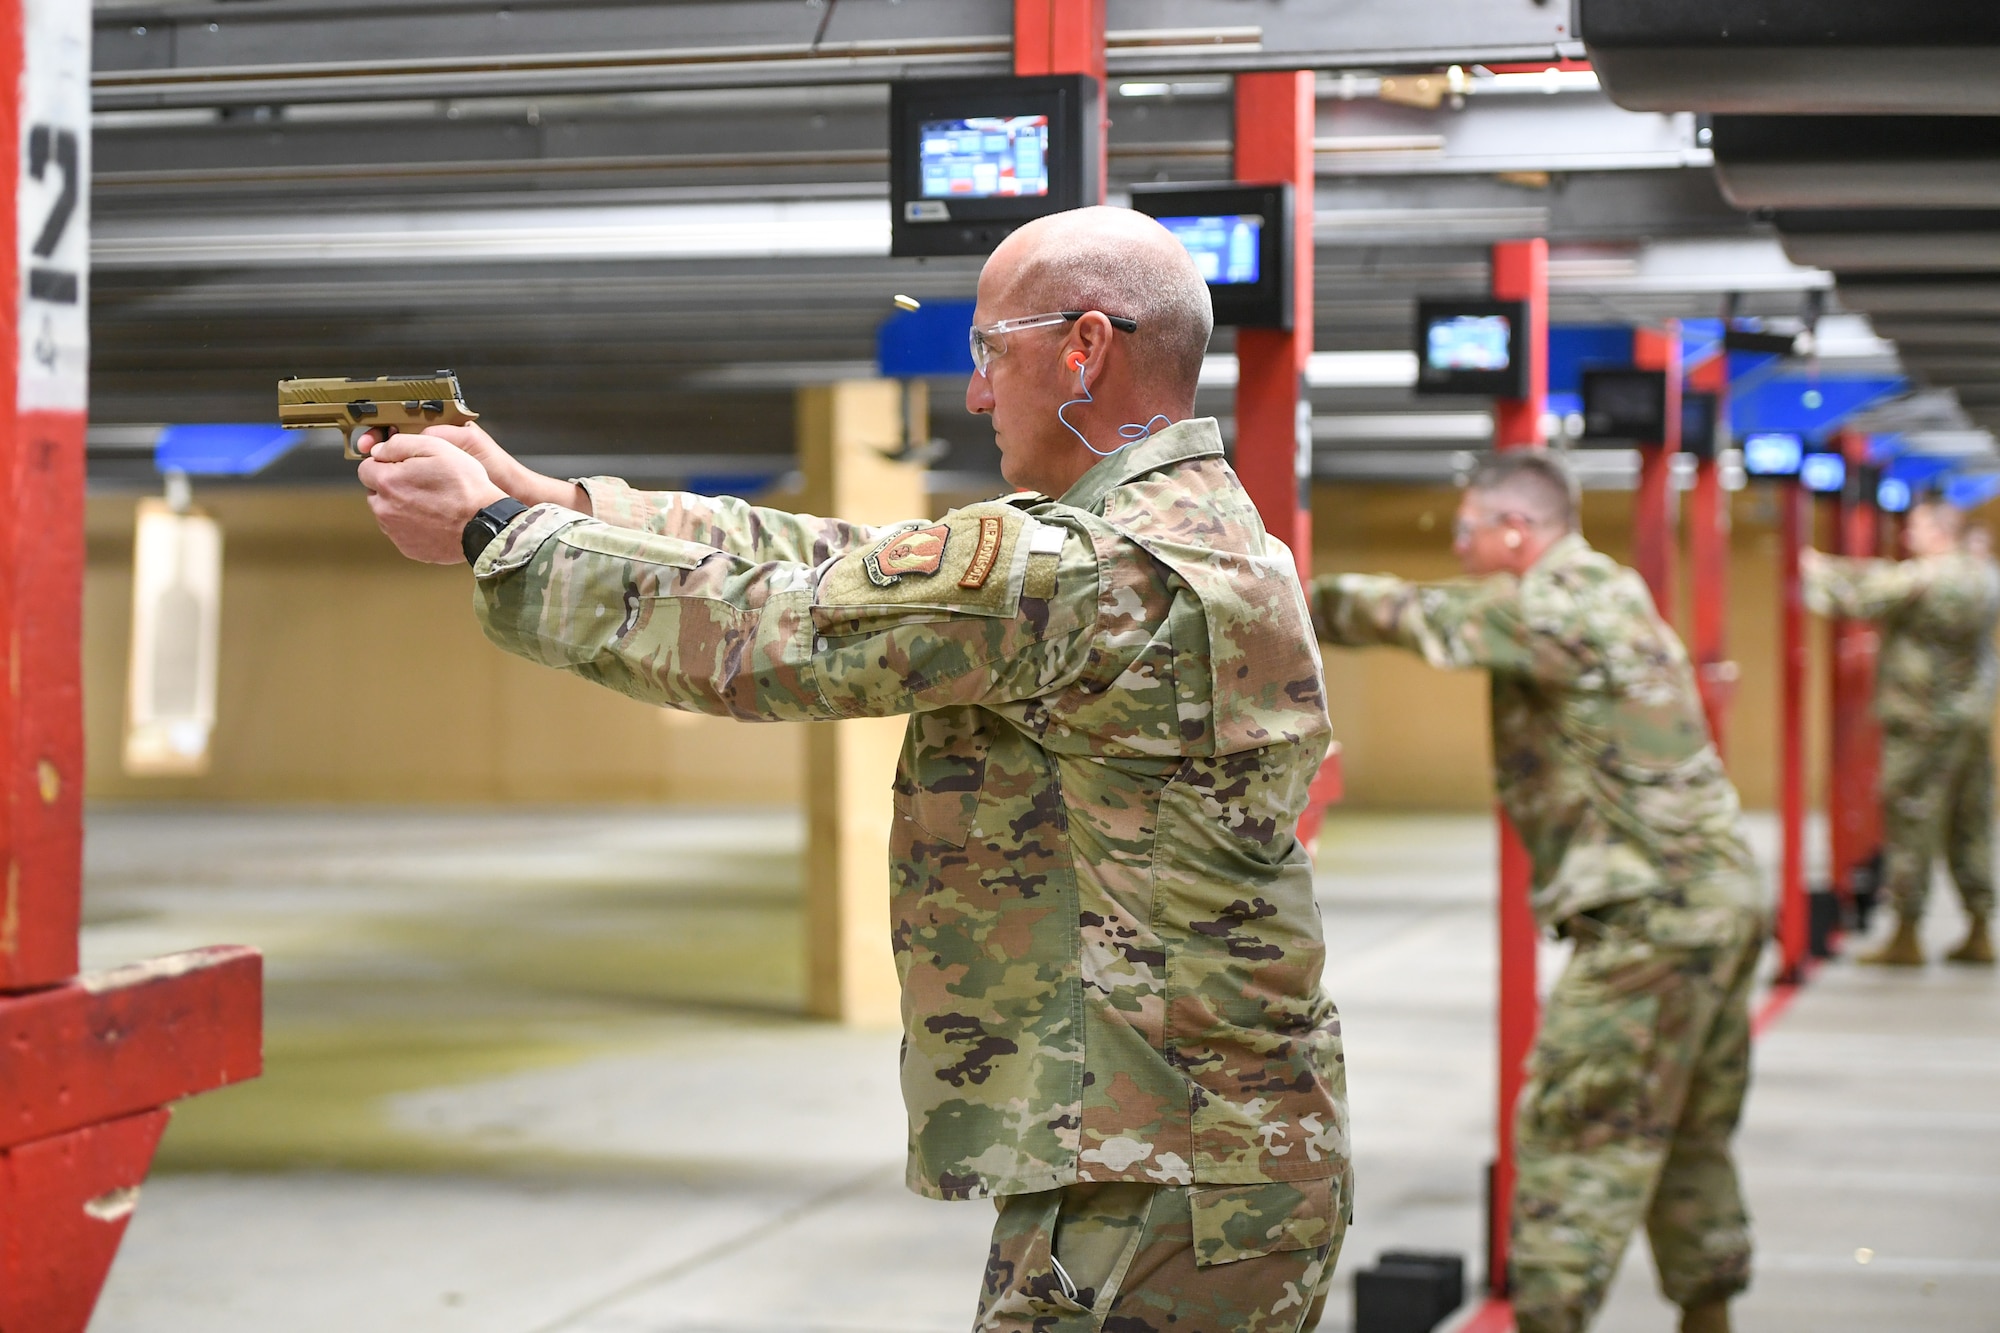 Chief Master Sgt. David Flosi, Air Force Sustainment Center command chief master sergeant, shoots the M18 pistol.